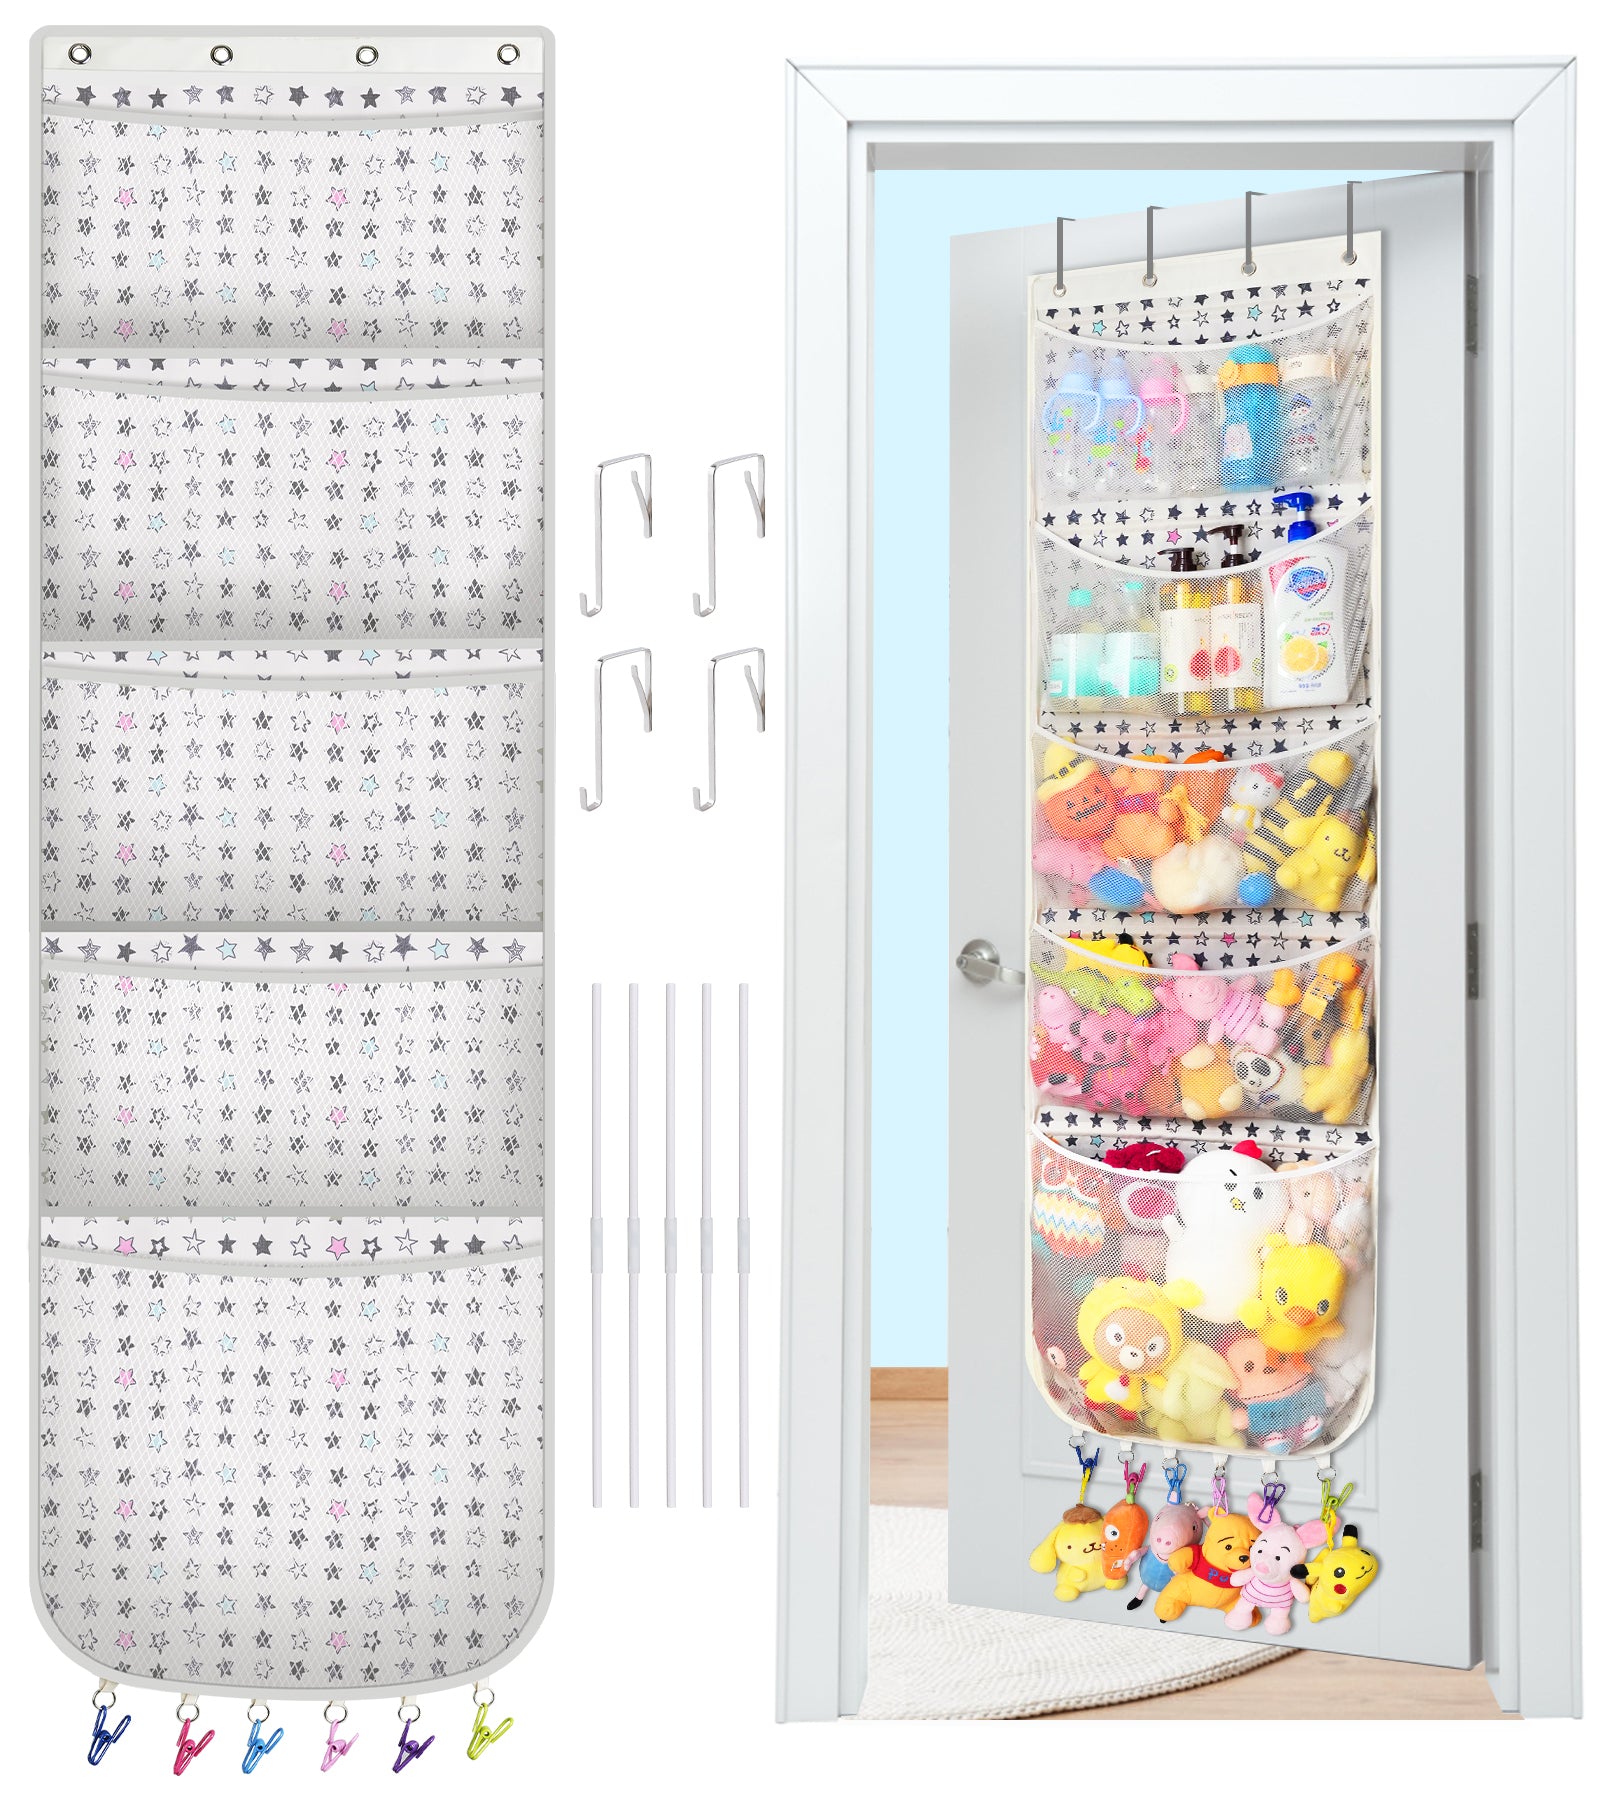 Large 5-Pocket Storage for Stuffed Animals| Over the Door